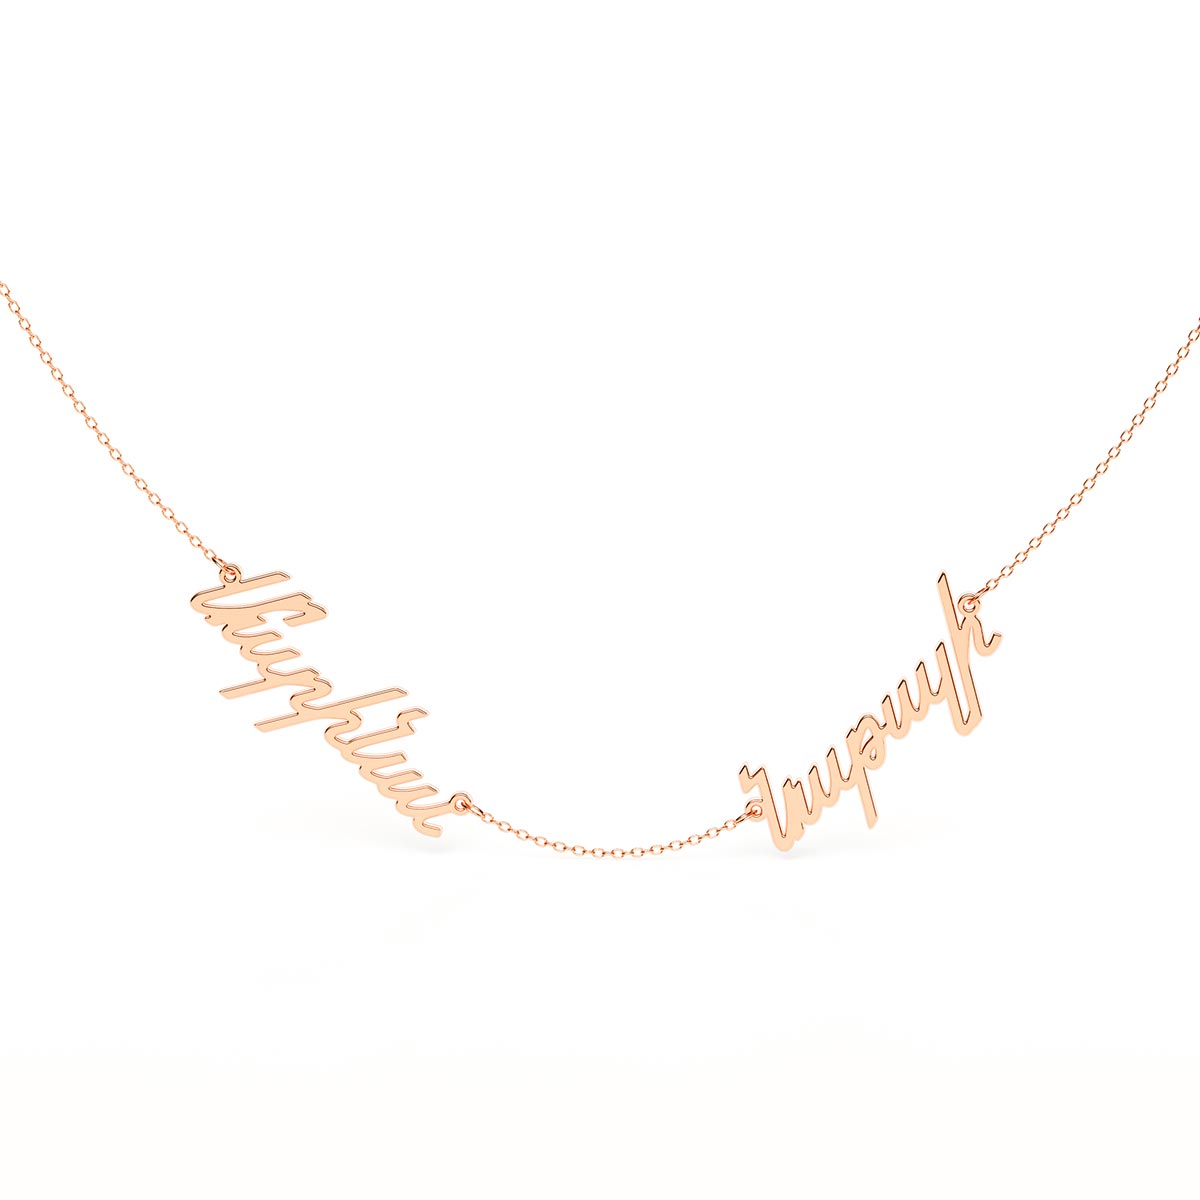 Armenian Personalized 2 Name Necklace